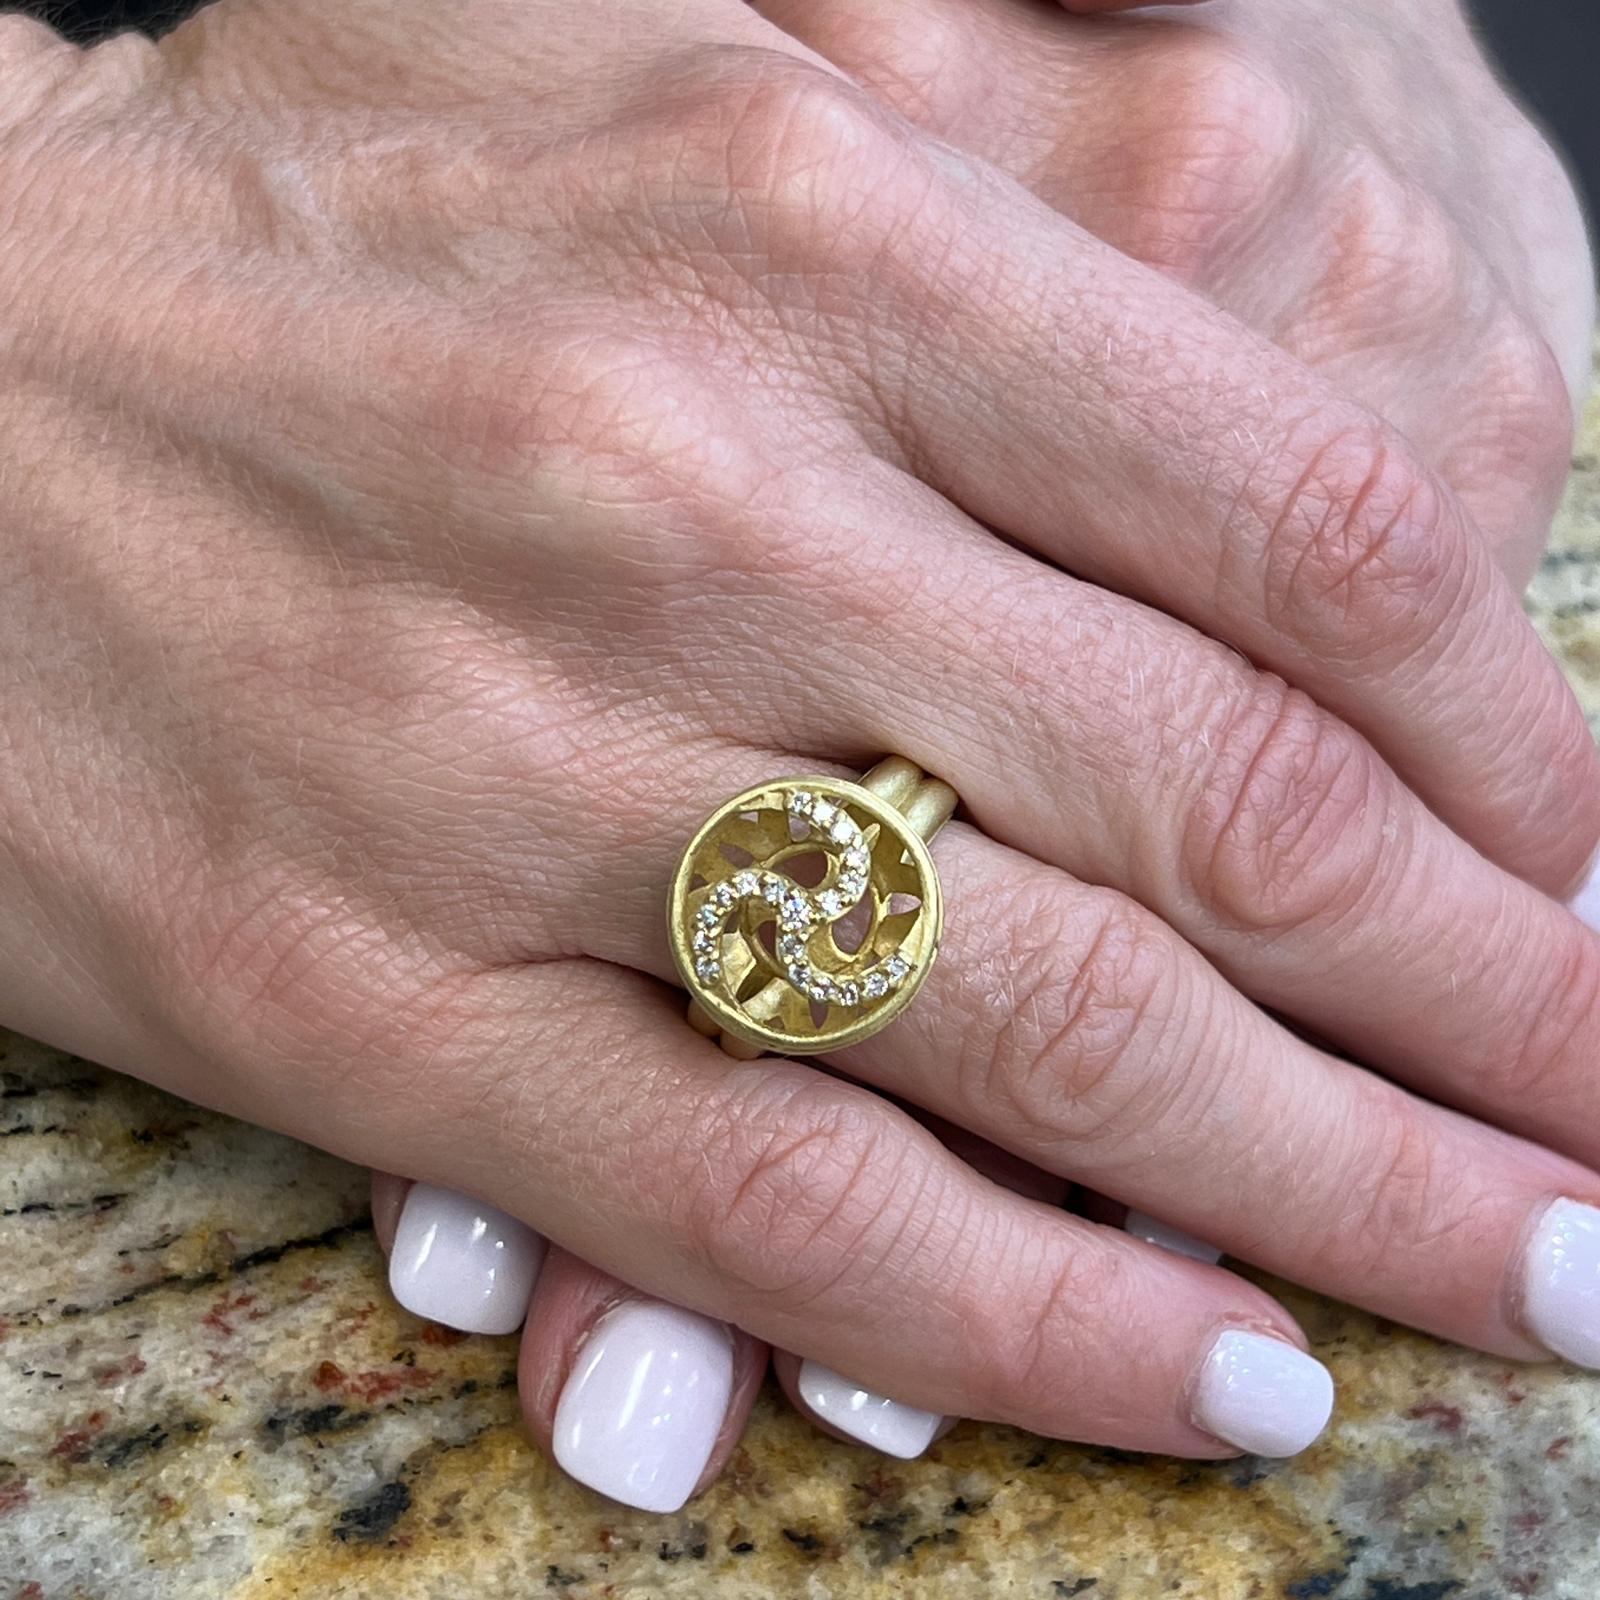 Diamond ring by designer Slane & Slane fashioned in brushed finish 18 karat yellow gold. The ring features 19 round brilliant cut diamonds weighing approximately .40 CTW and graded G-H color and VS clarity. The top measures 16mm in diameter, and the